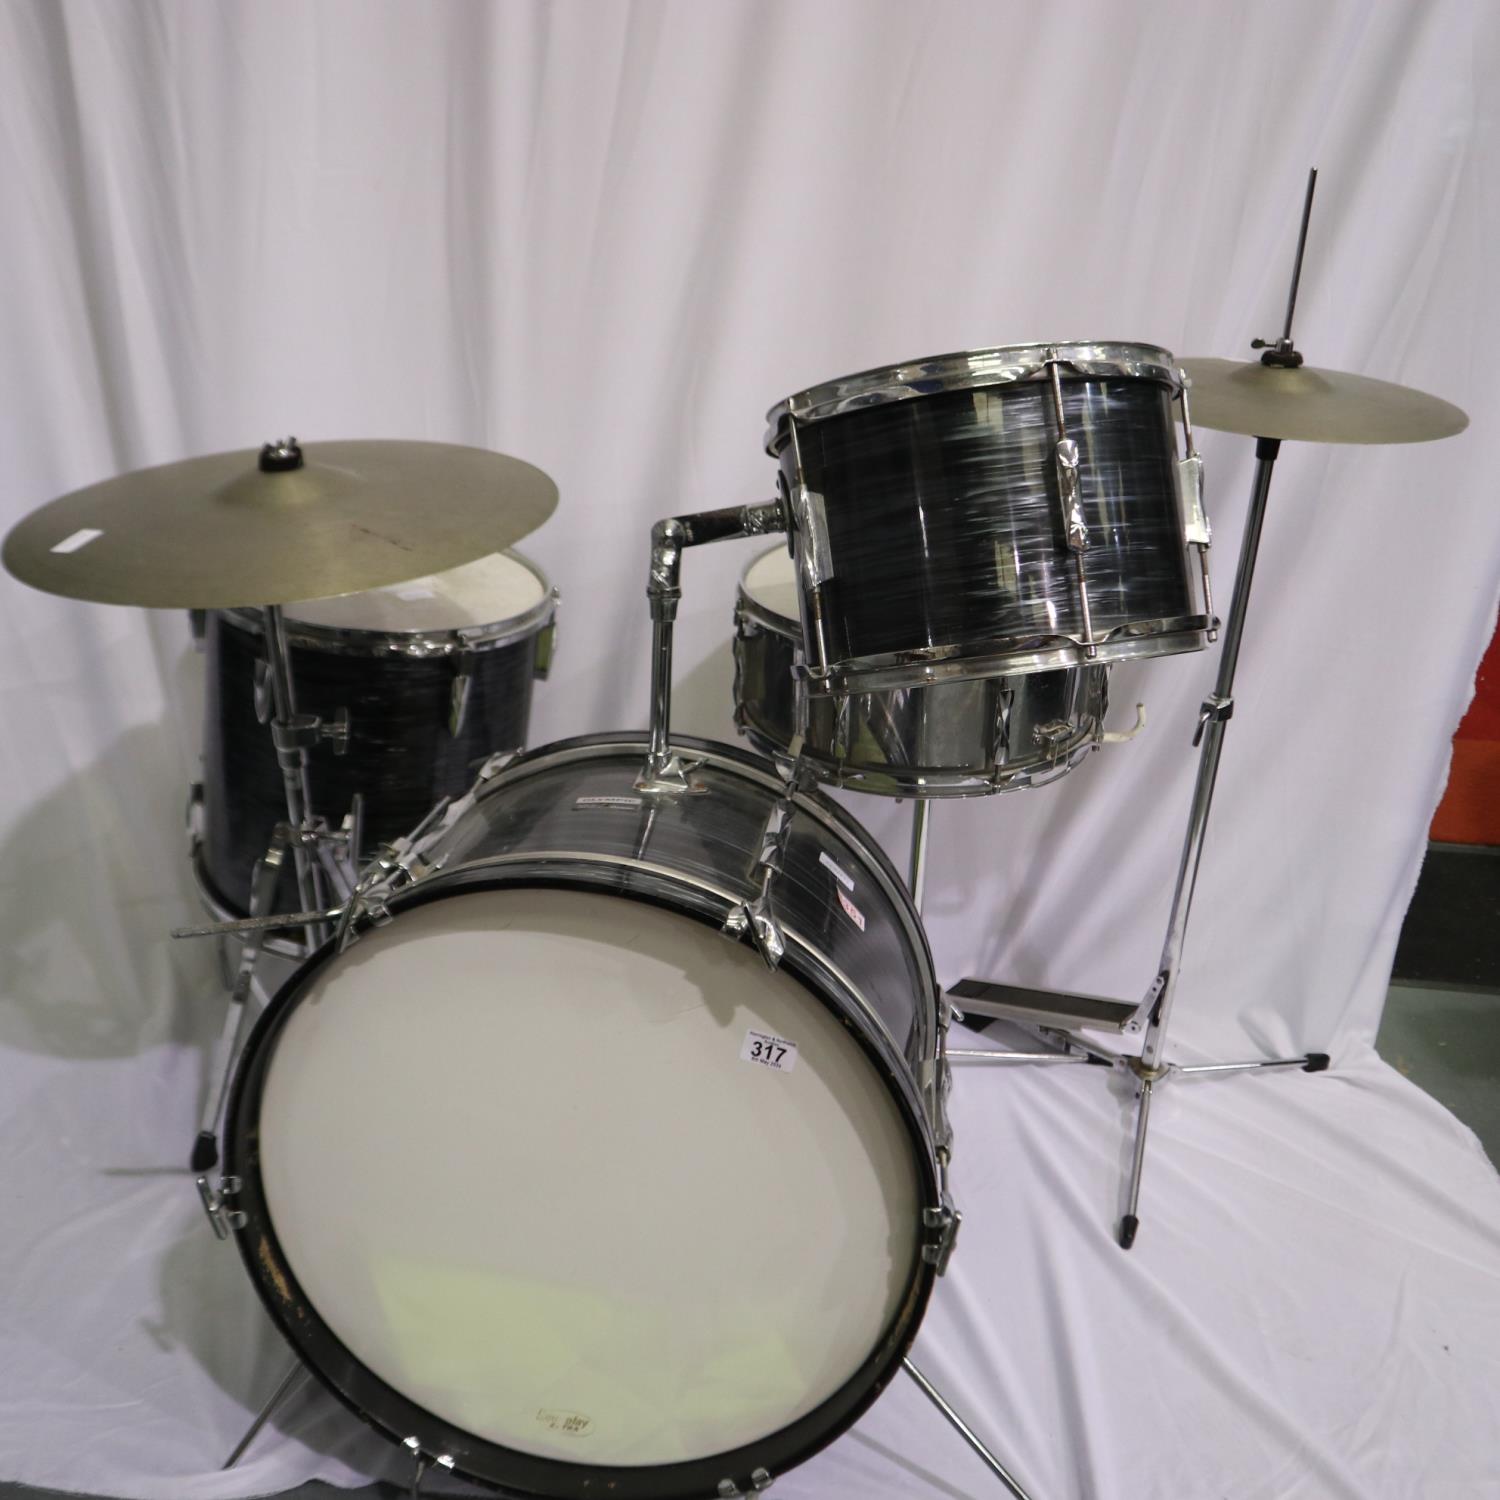 Premier Olympic drum kit. Not available for in-house P&P